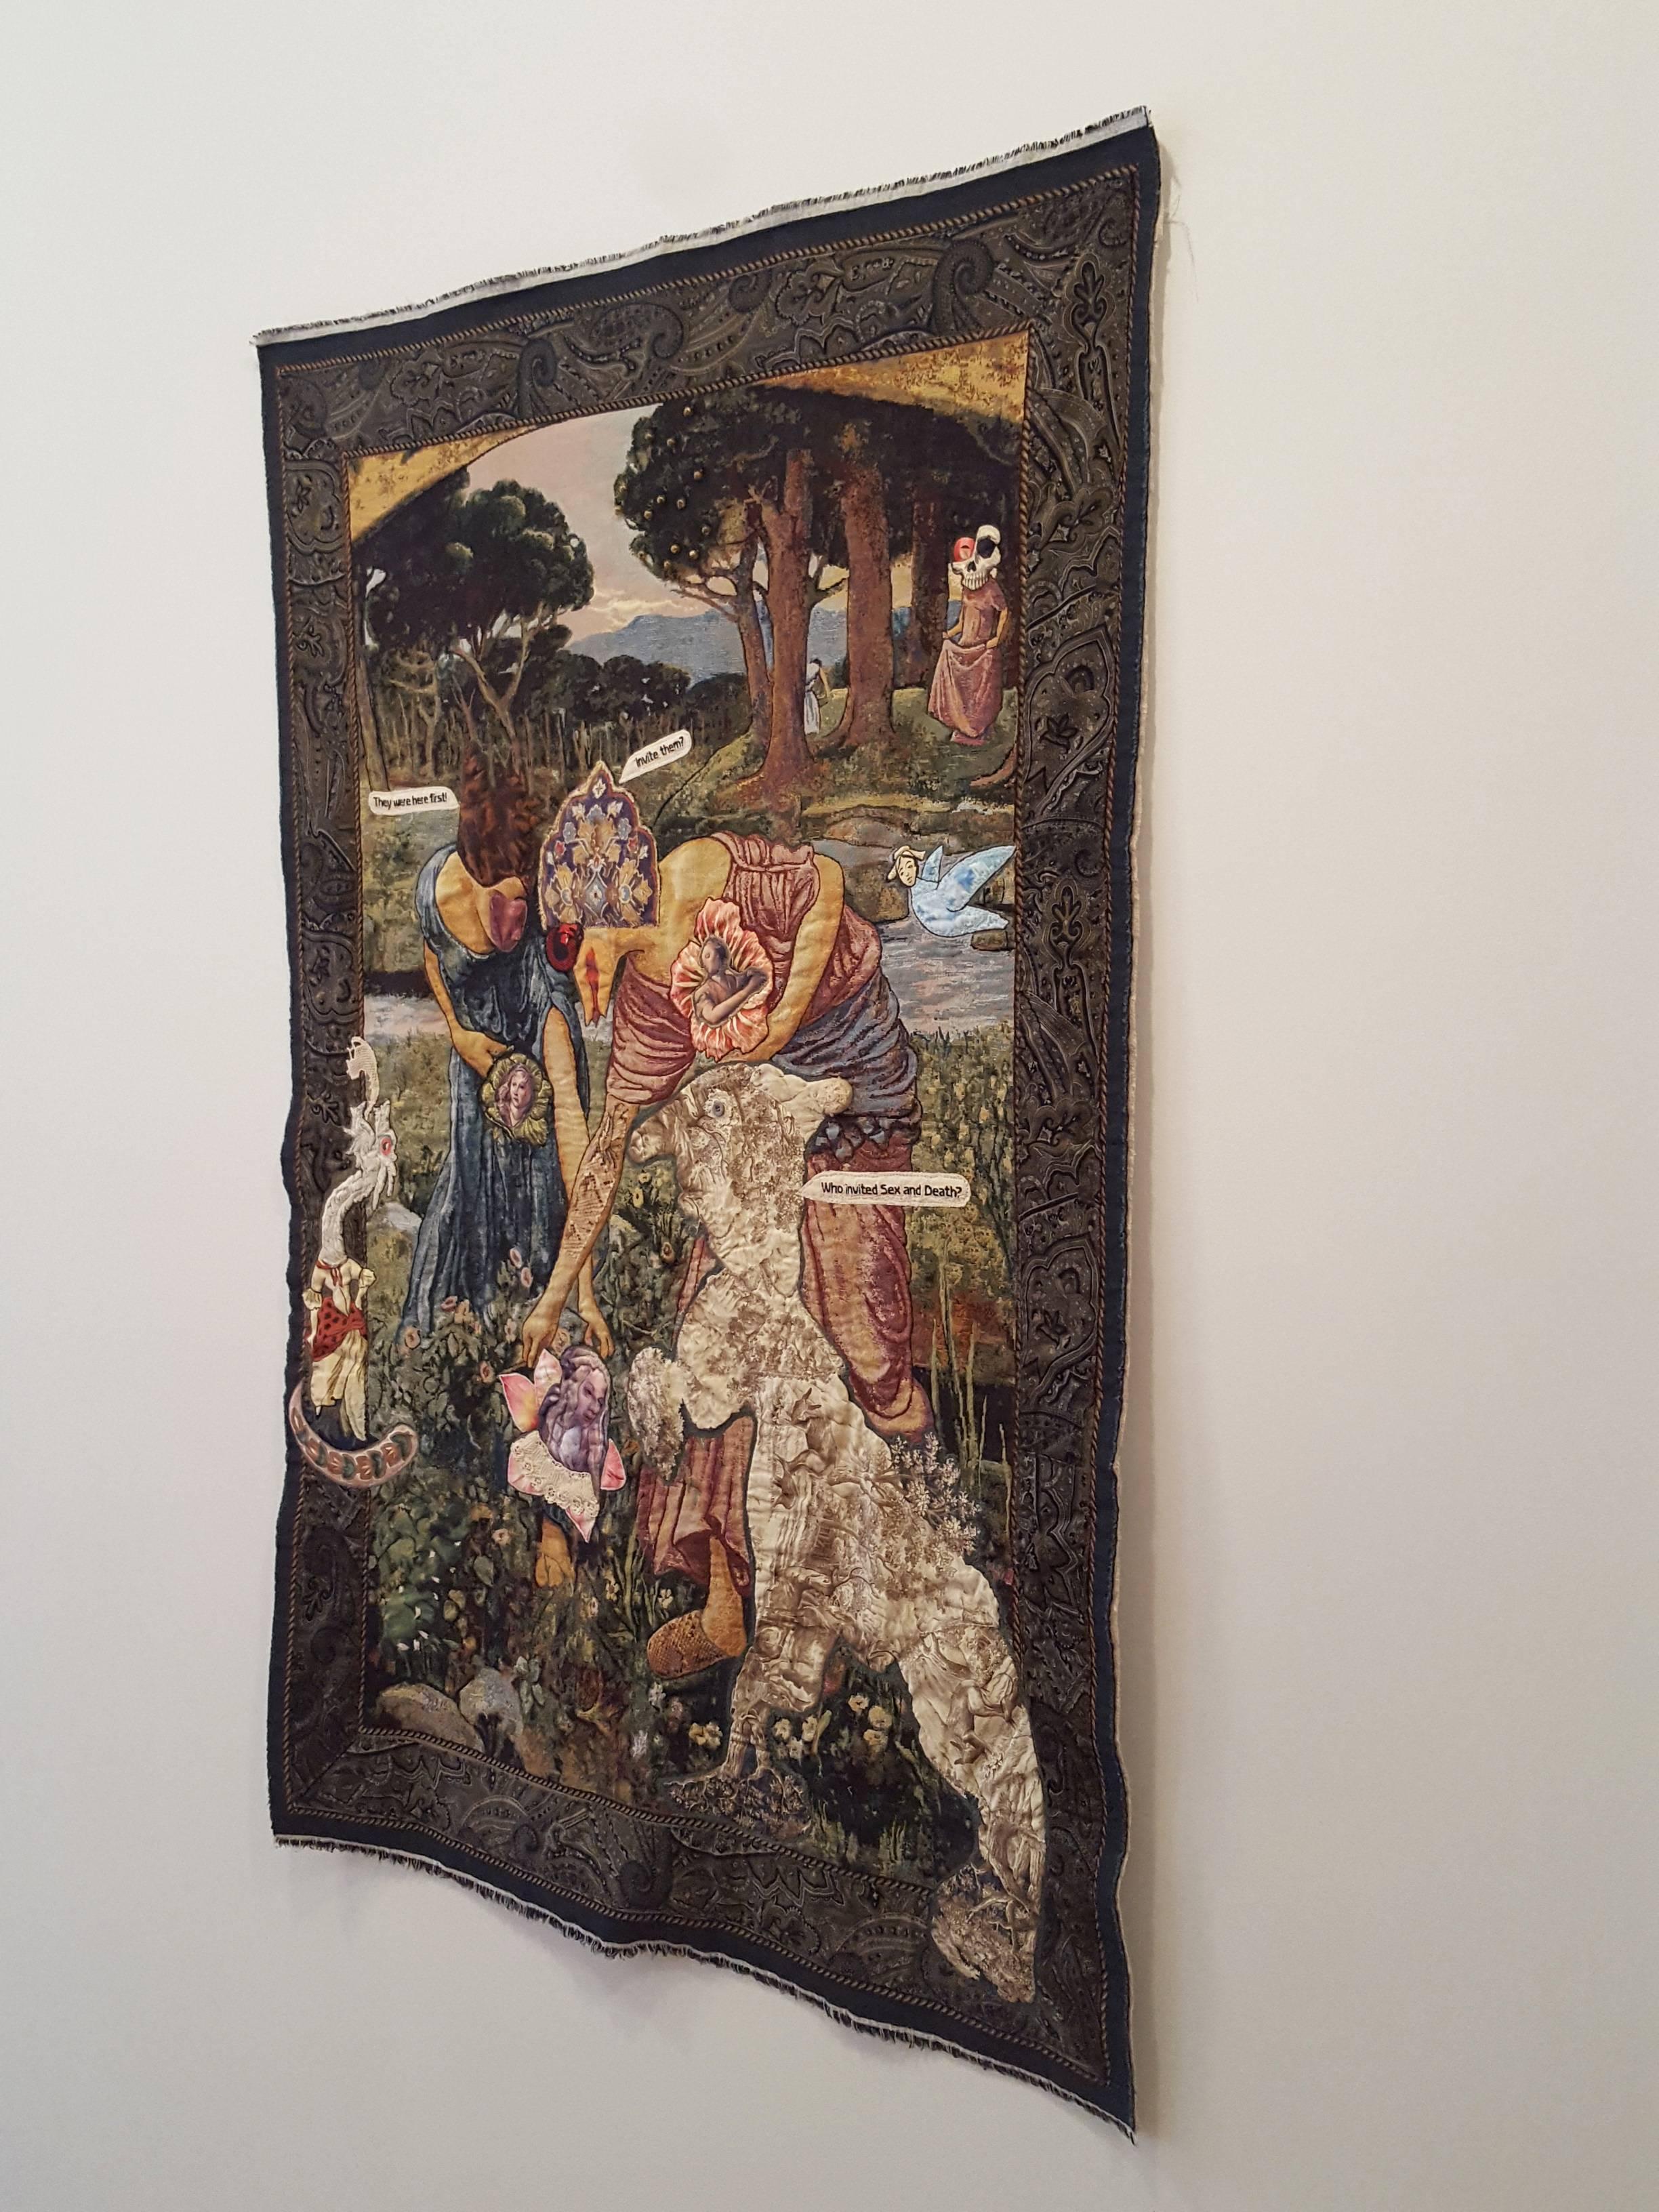 China Marks
Ripe for the Picking, 2017
Fabric, lace, thread, epoxy glue, glass beads, 
fusible adhesive on a contemporary tapestry 
copy of Gather Ye Rosebuds While Ye May, 
by John William Waterhouse
55 x 36 inches
